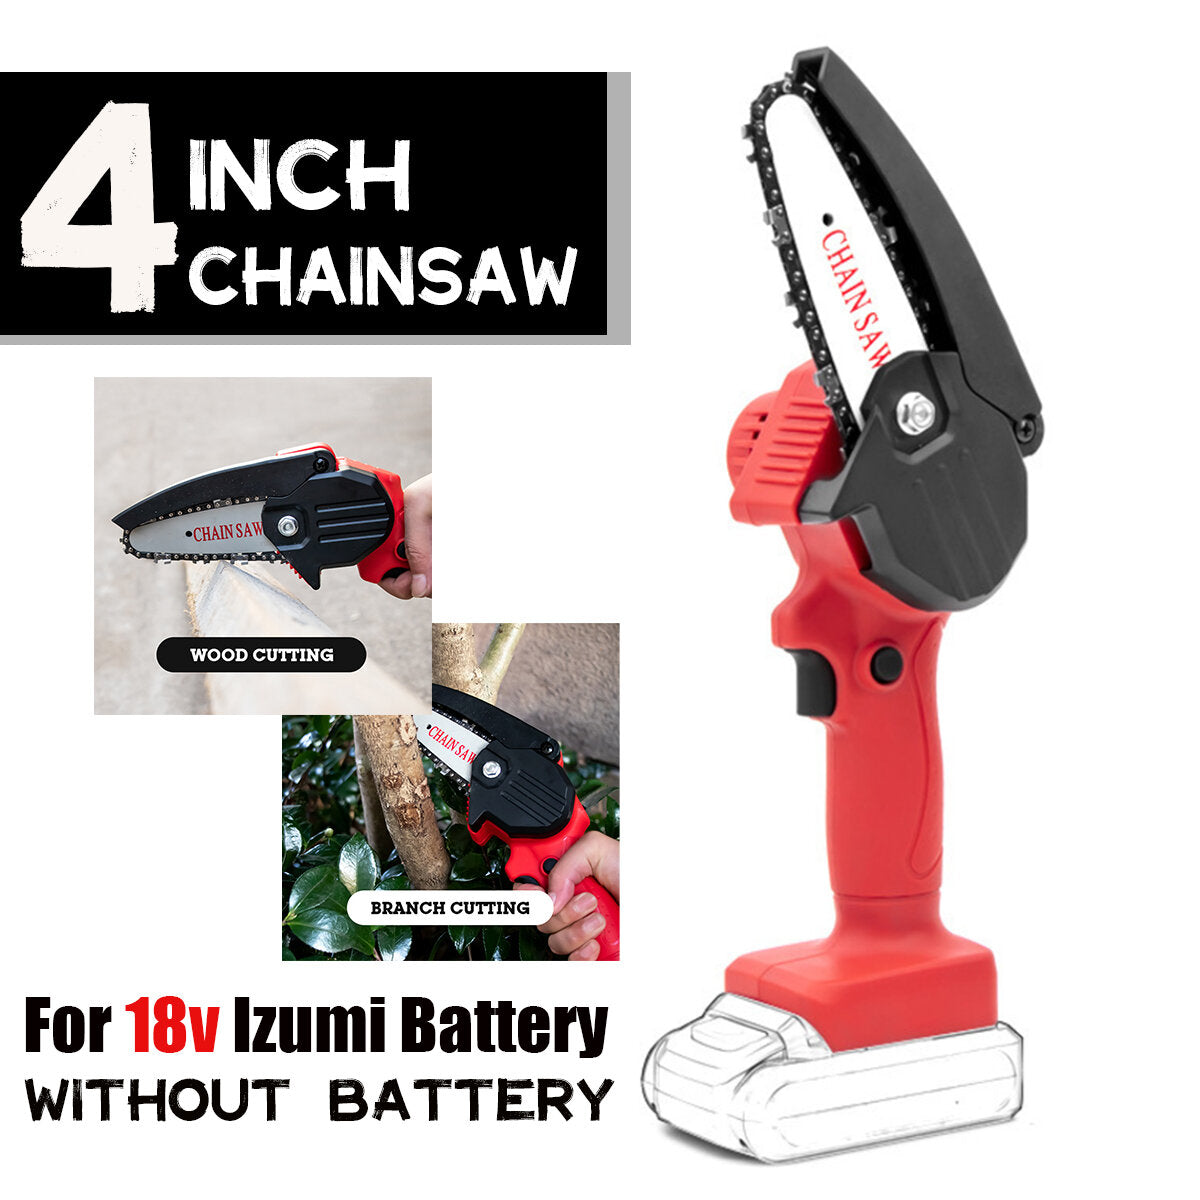 Portable Electric Saw Woodworking Chain Saw Tree Pruning Tool for 18V Makita/Izumi Battery